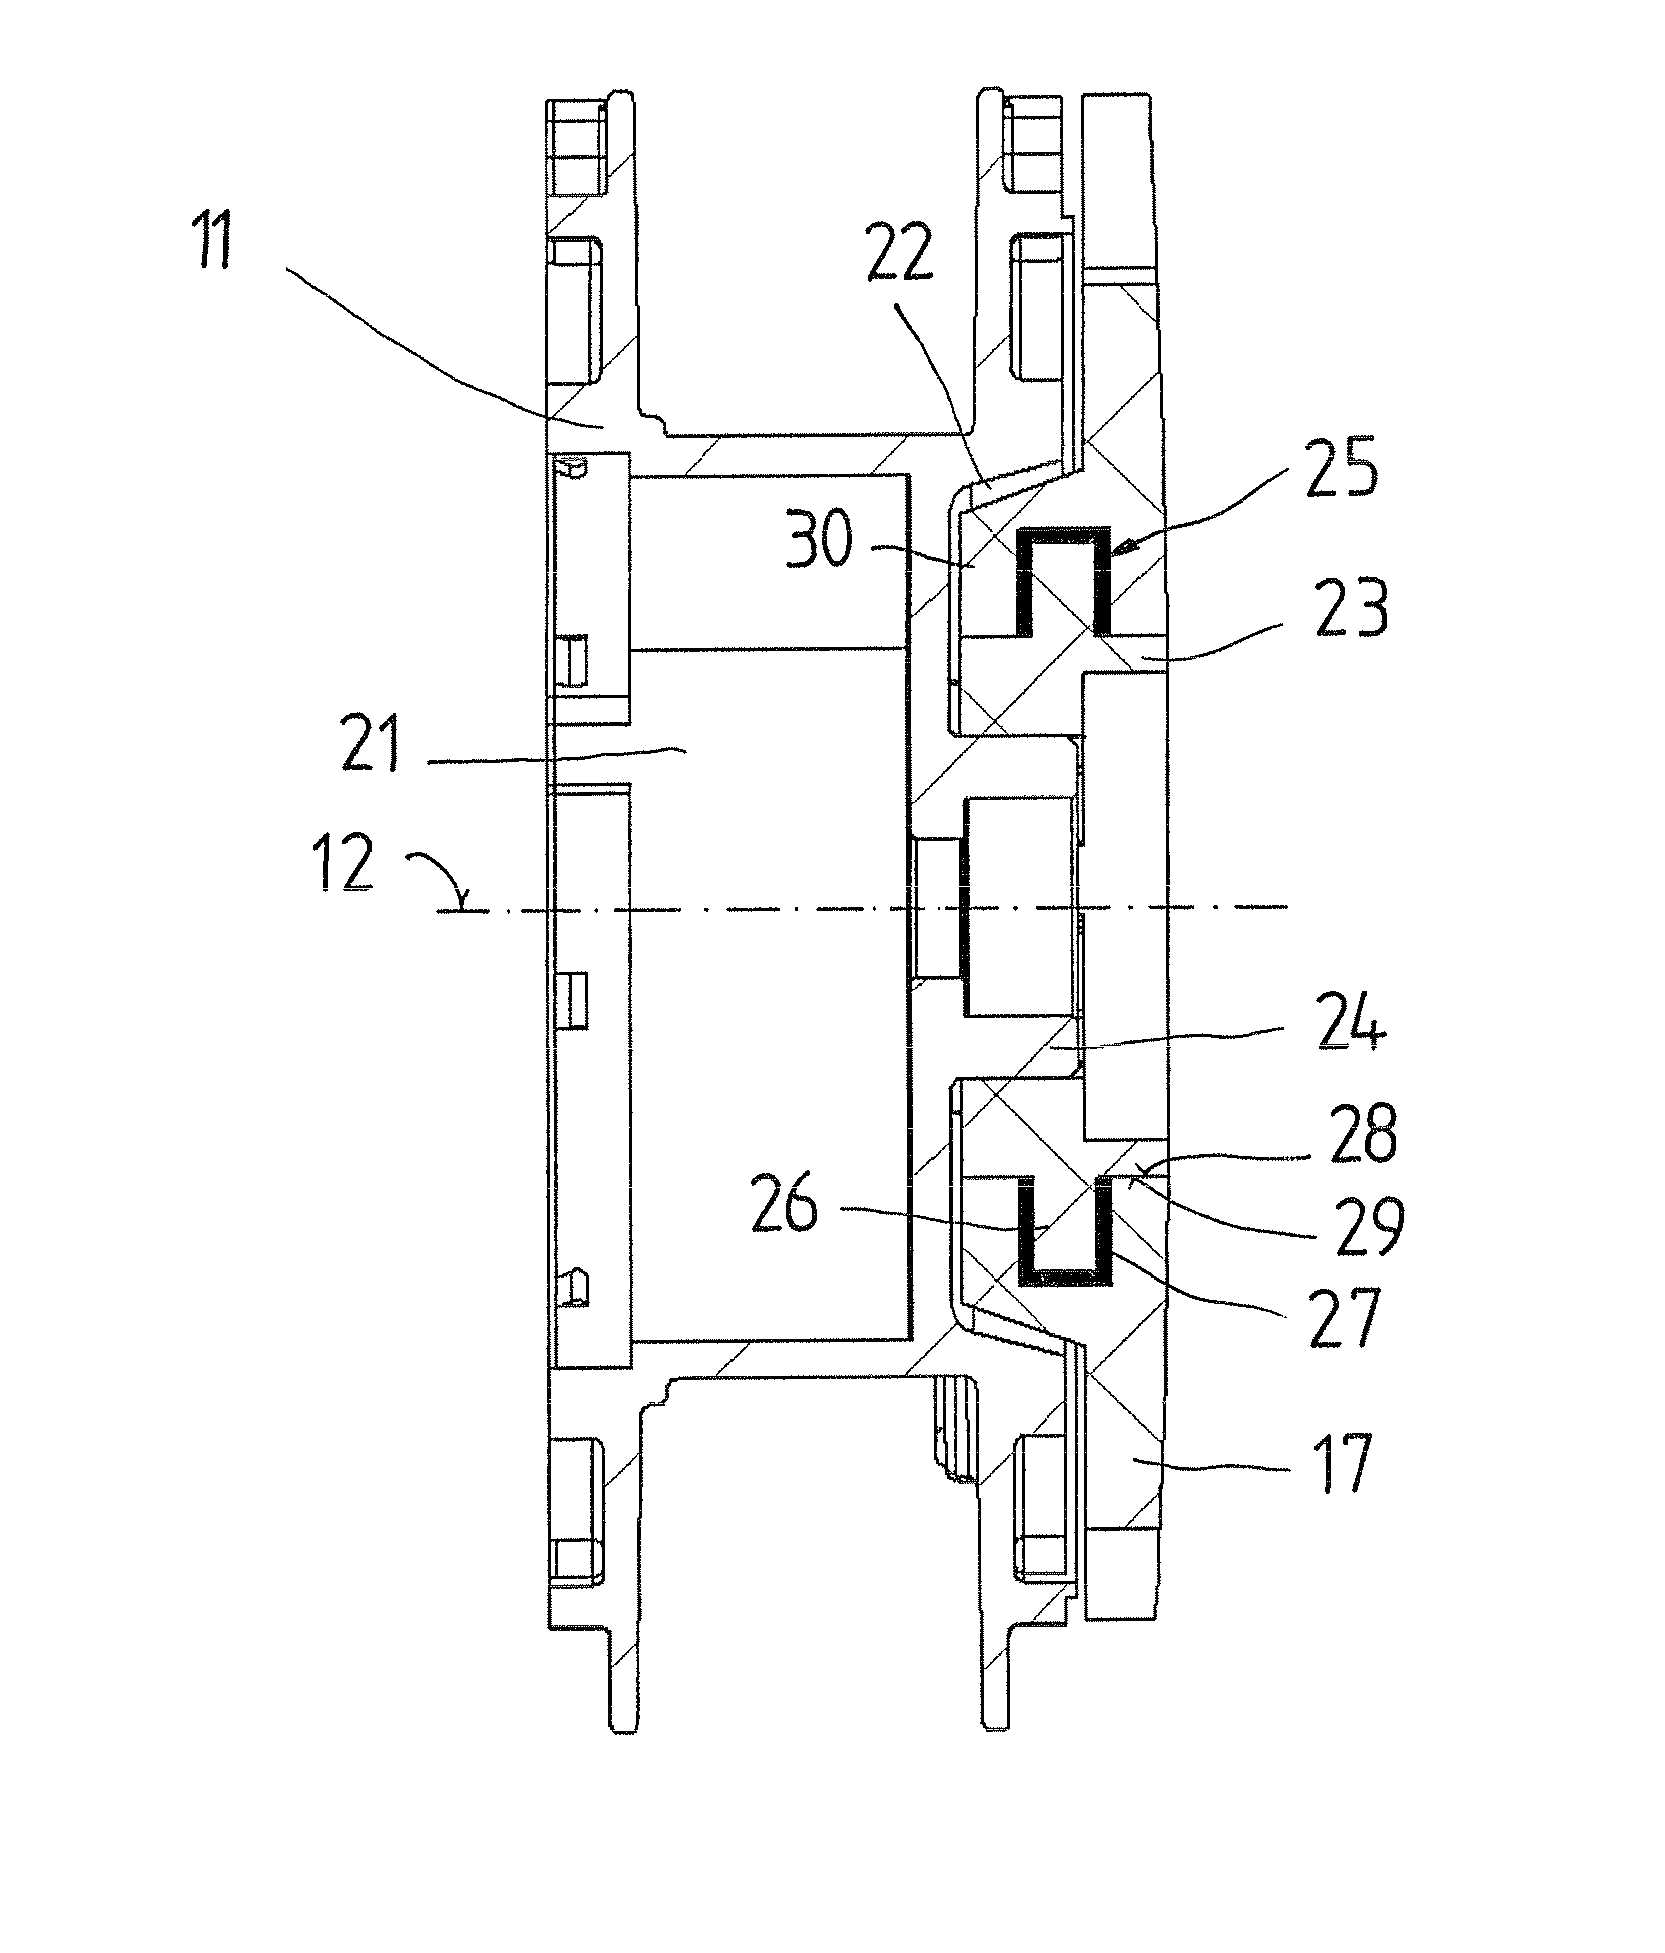 Braking device for a rope pulley of a mechanically retractable and extendable leash for walking animals